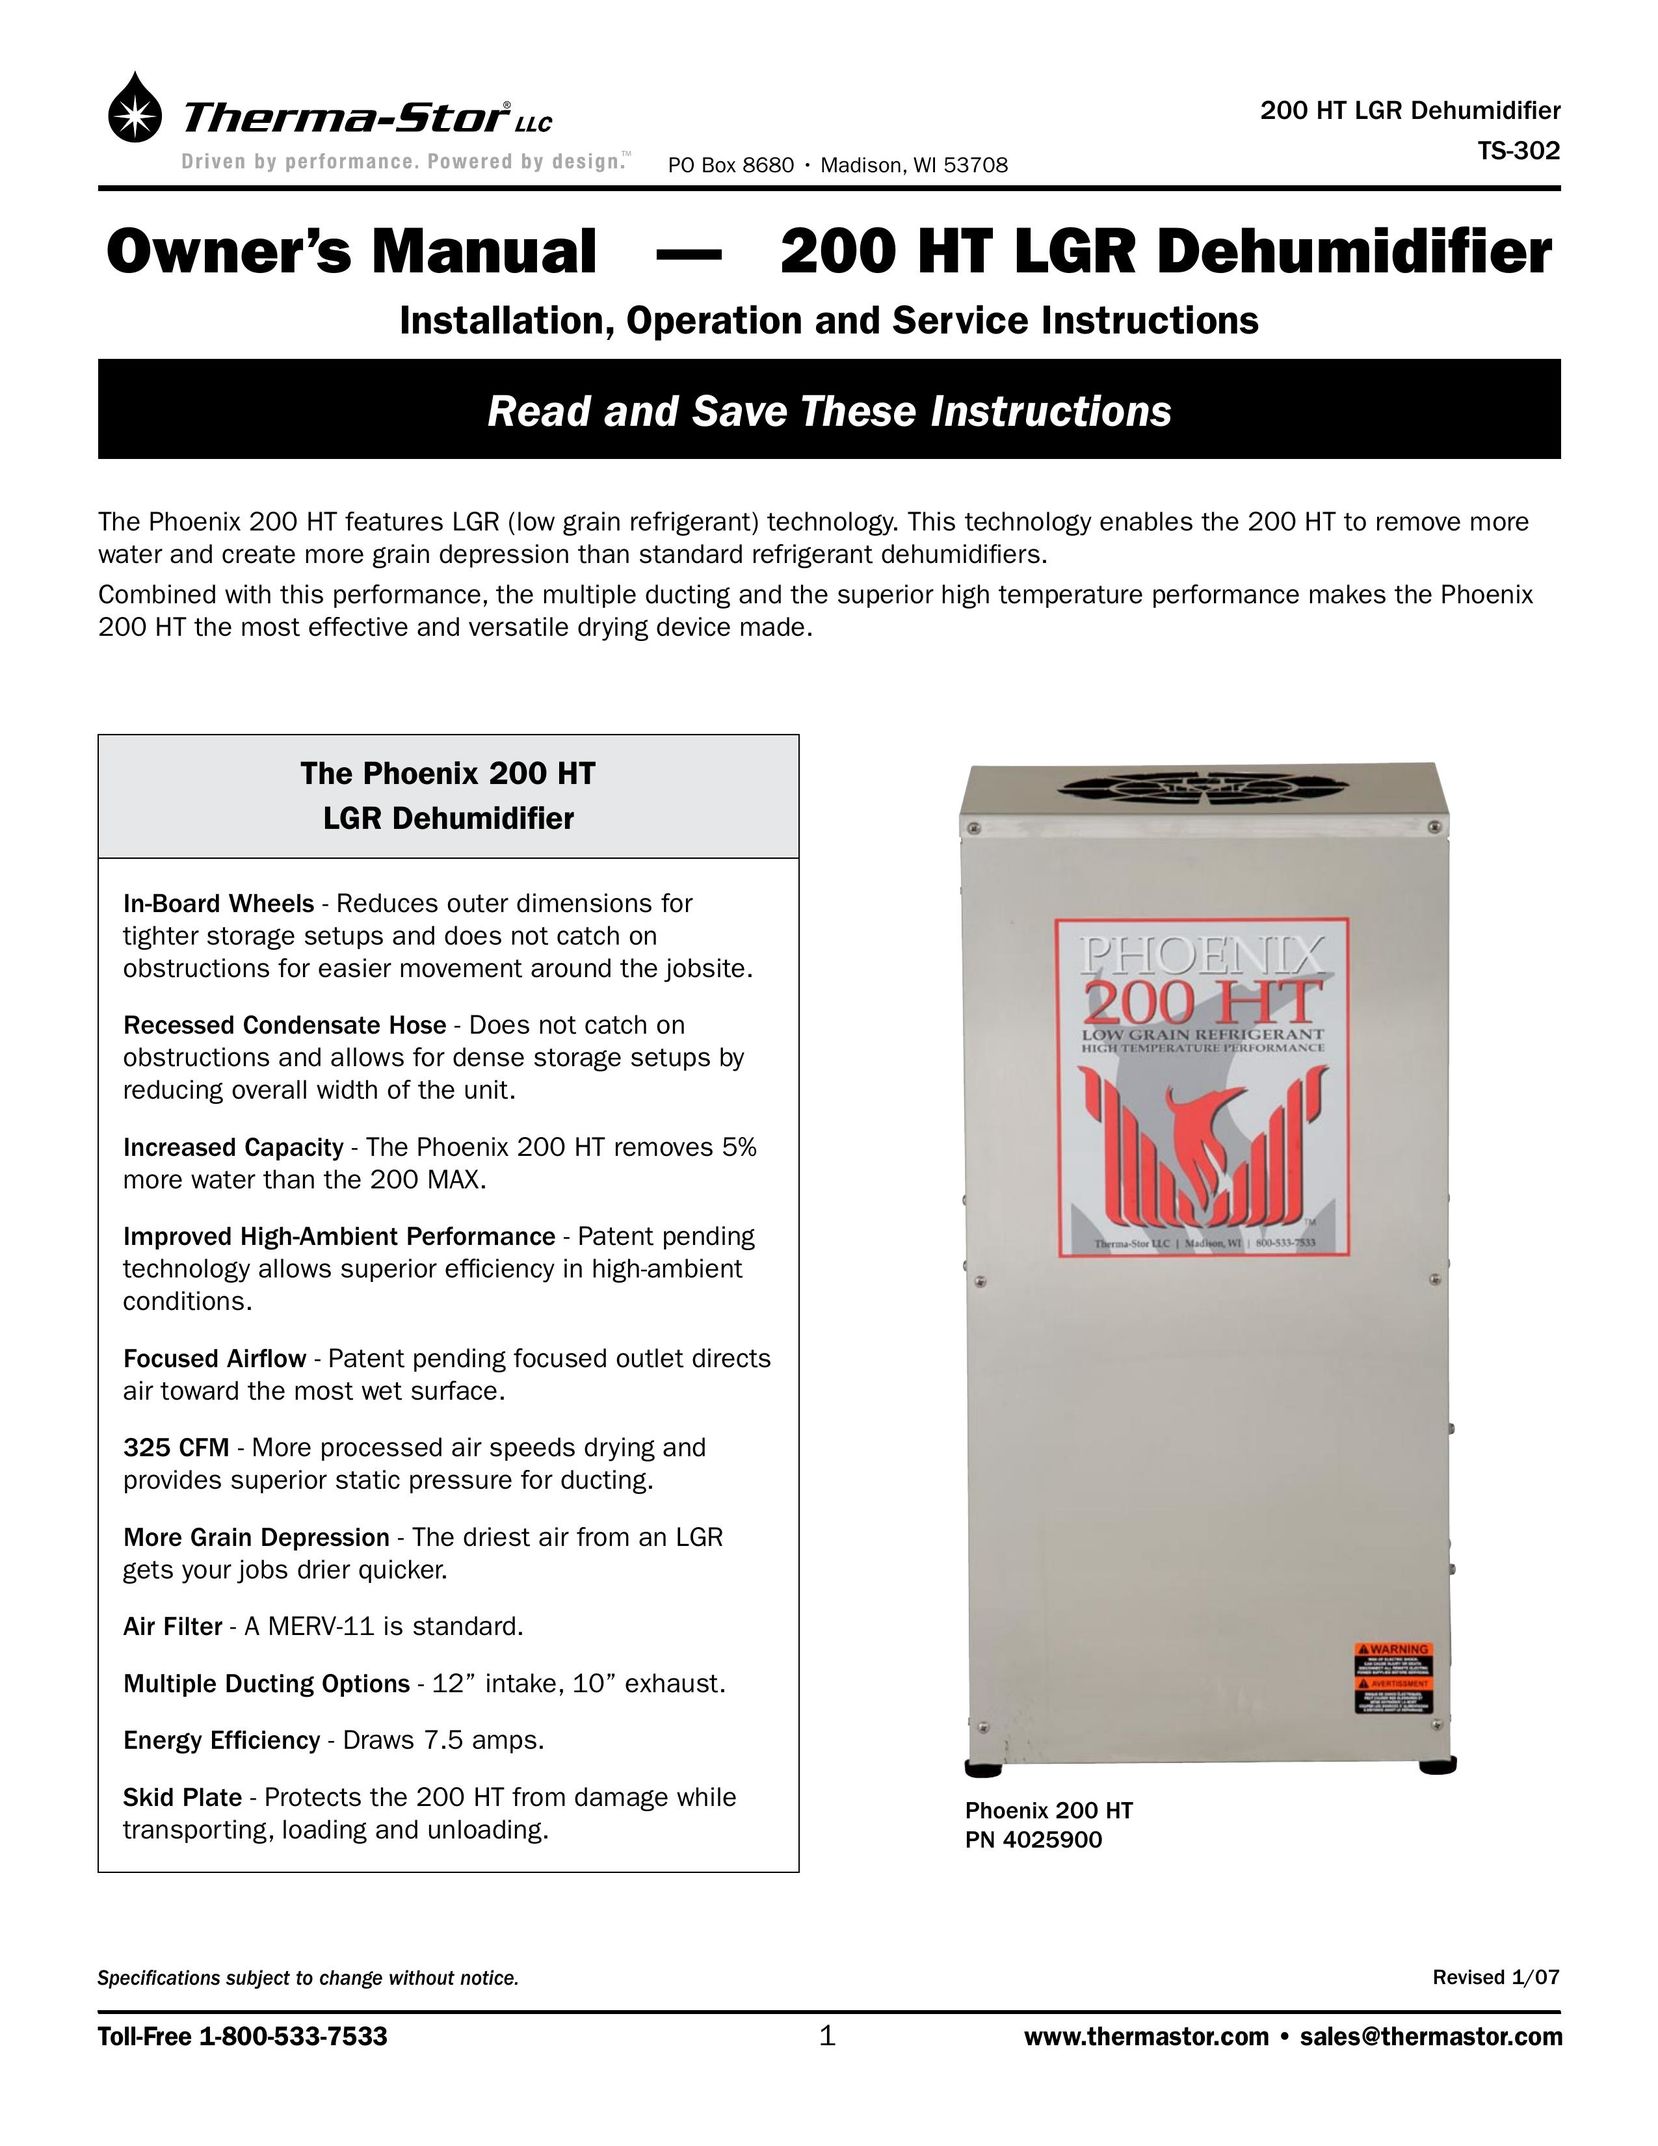 Therma-Stor Products Group Phoenix 200 HT Dehumidifier User Manual